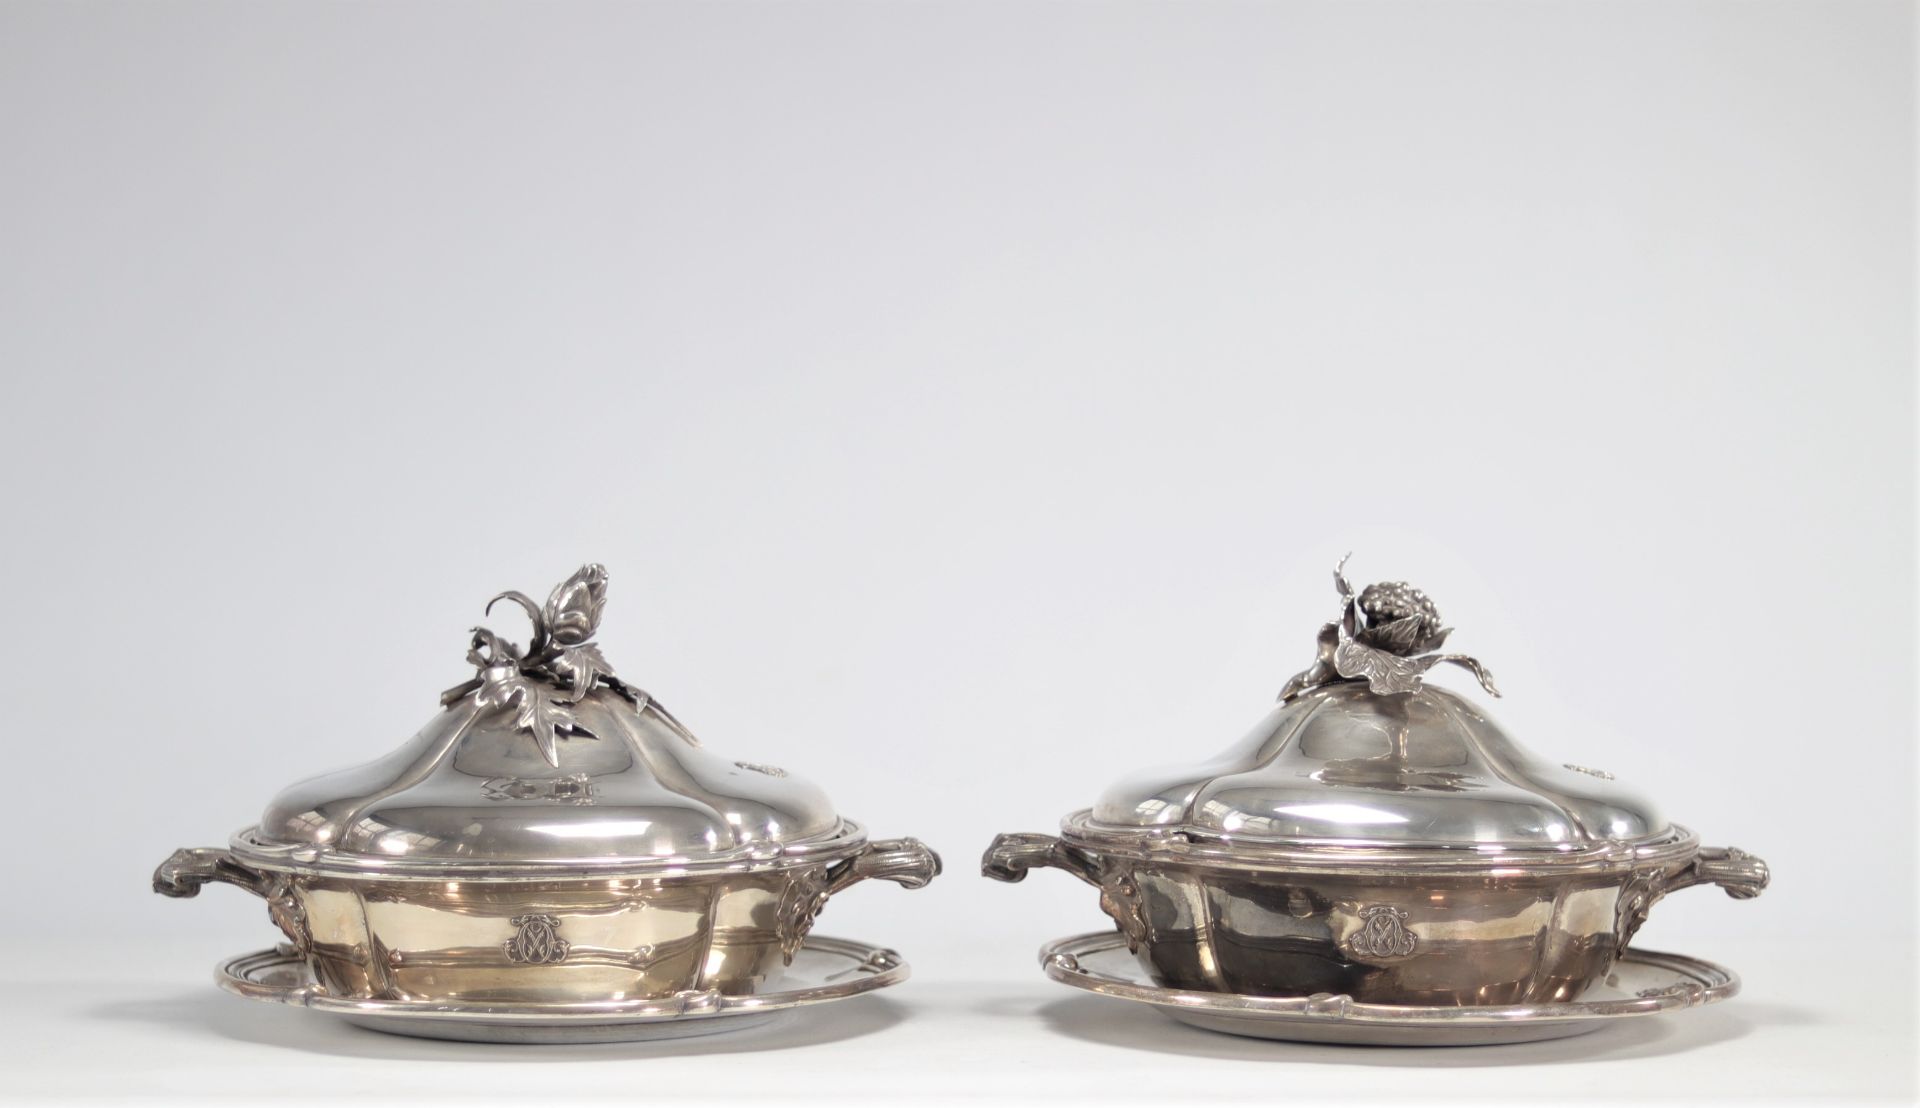 Two silver tureens Louis XV style, master goldsmith Augoc Aine, with silver inner shells, approx. 5.